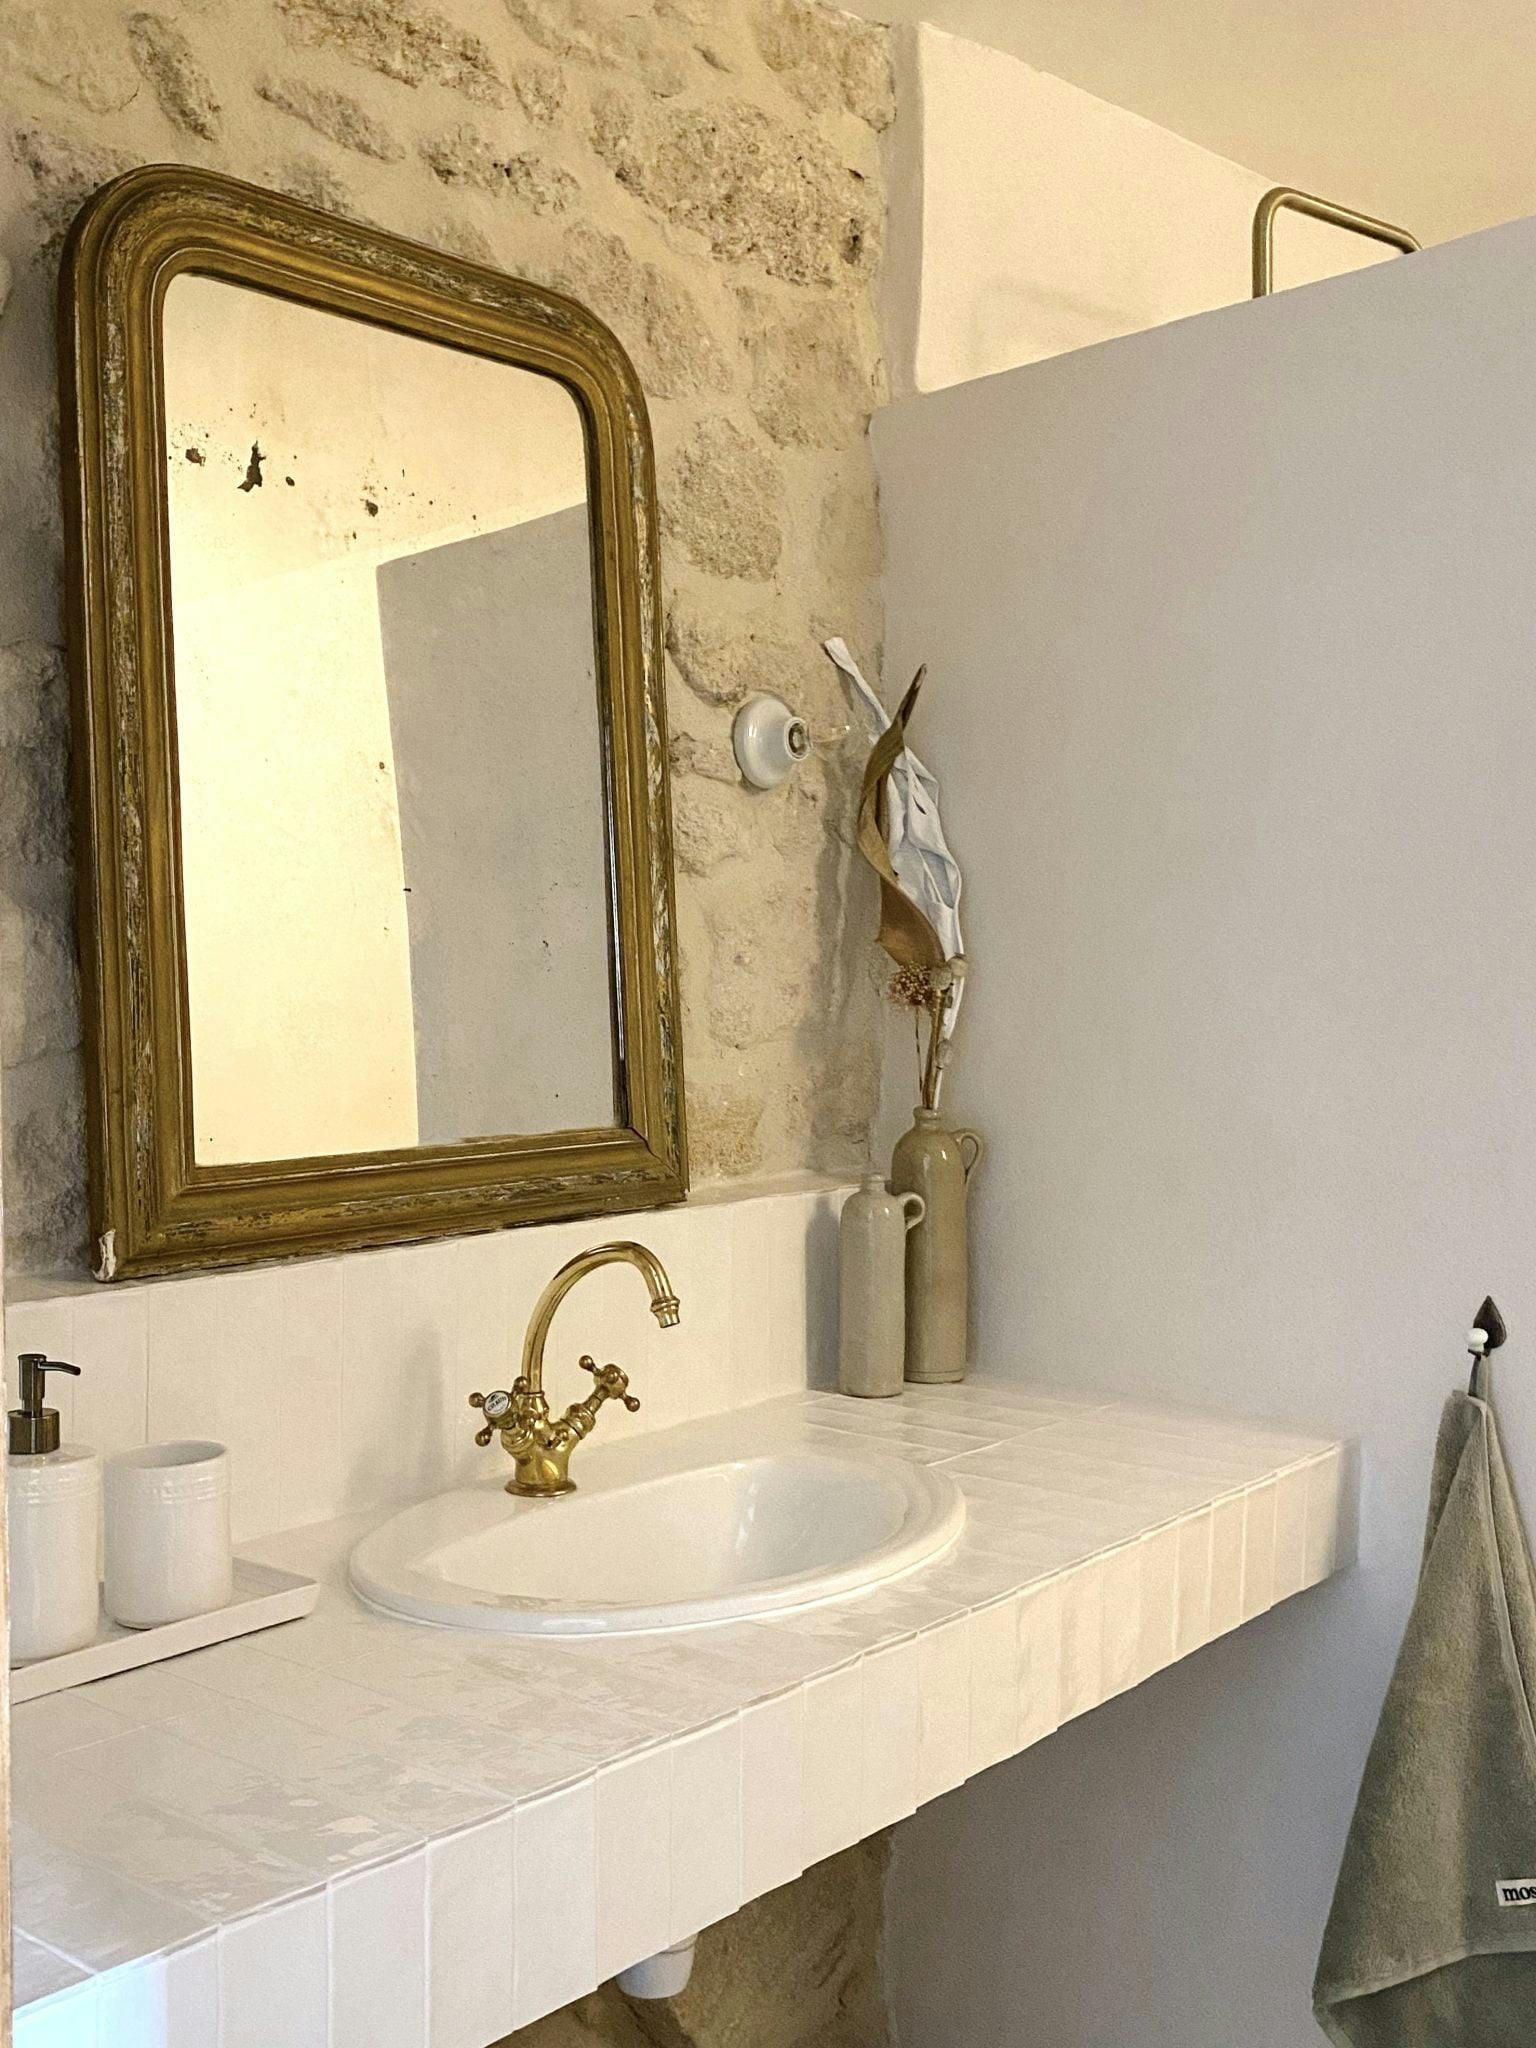 Antique washbasin and mirror set against a backdrop of stone and earthenware walls